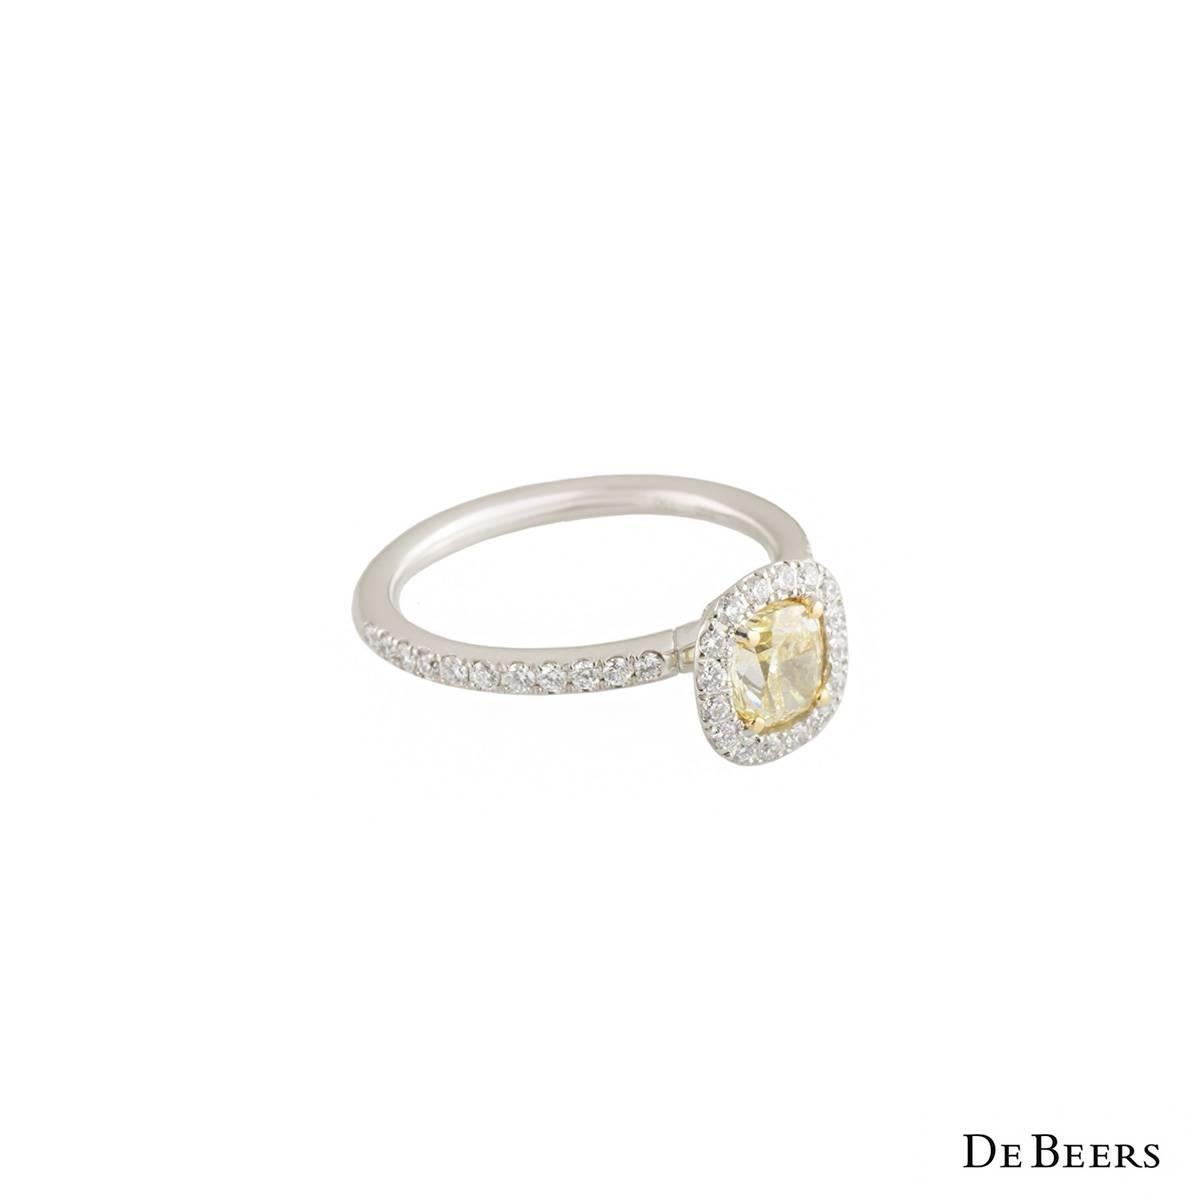 A beautiful platinum diamond De Beers ring from the Aura collection. The ring comprises of a cushion cut diamond in a 4 claw yellow gold setting with a halo of round brilliant cut white diamonds. Complementing this centre piece are round brilliant